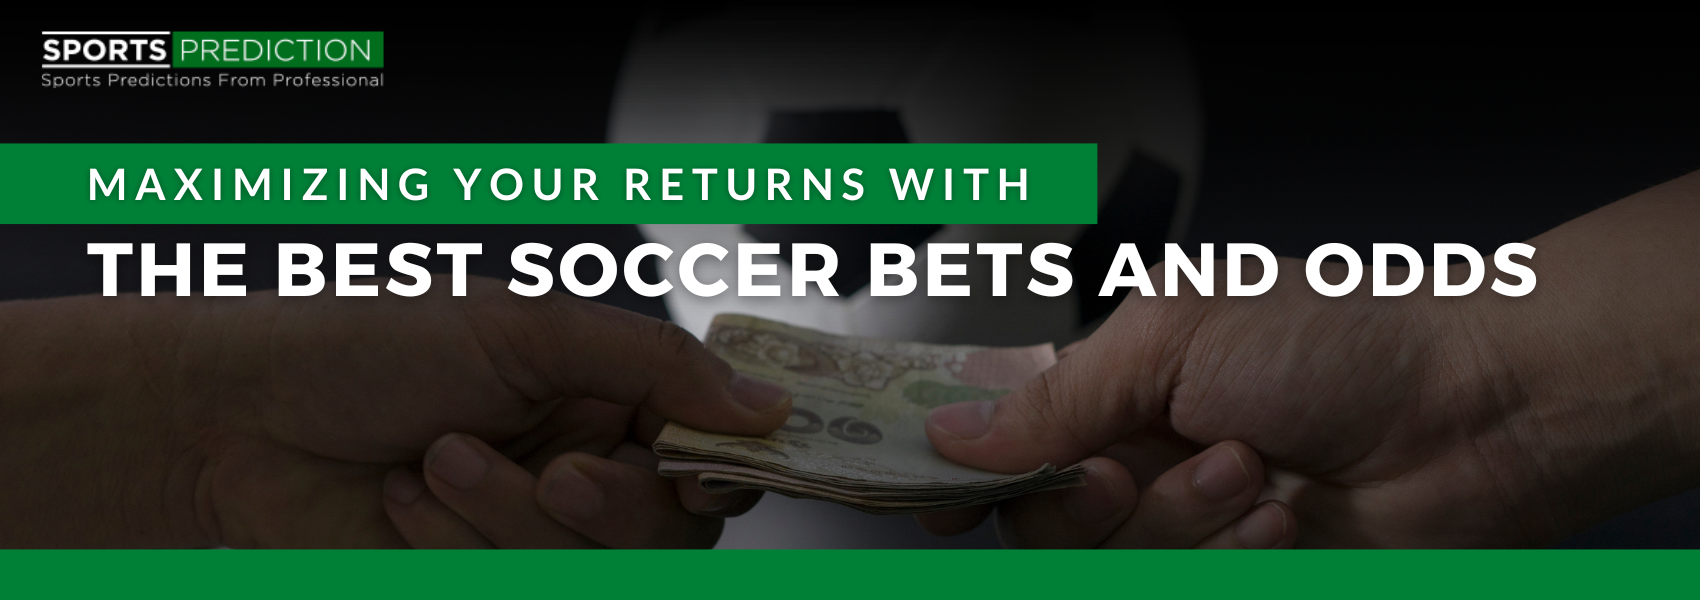 Maximizing Your Returns With The Best Soccer Bets And Odds